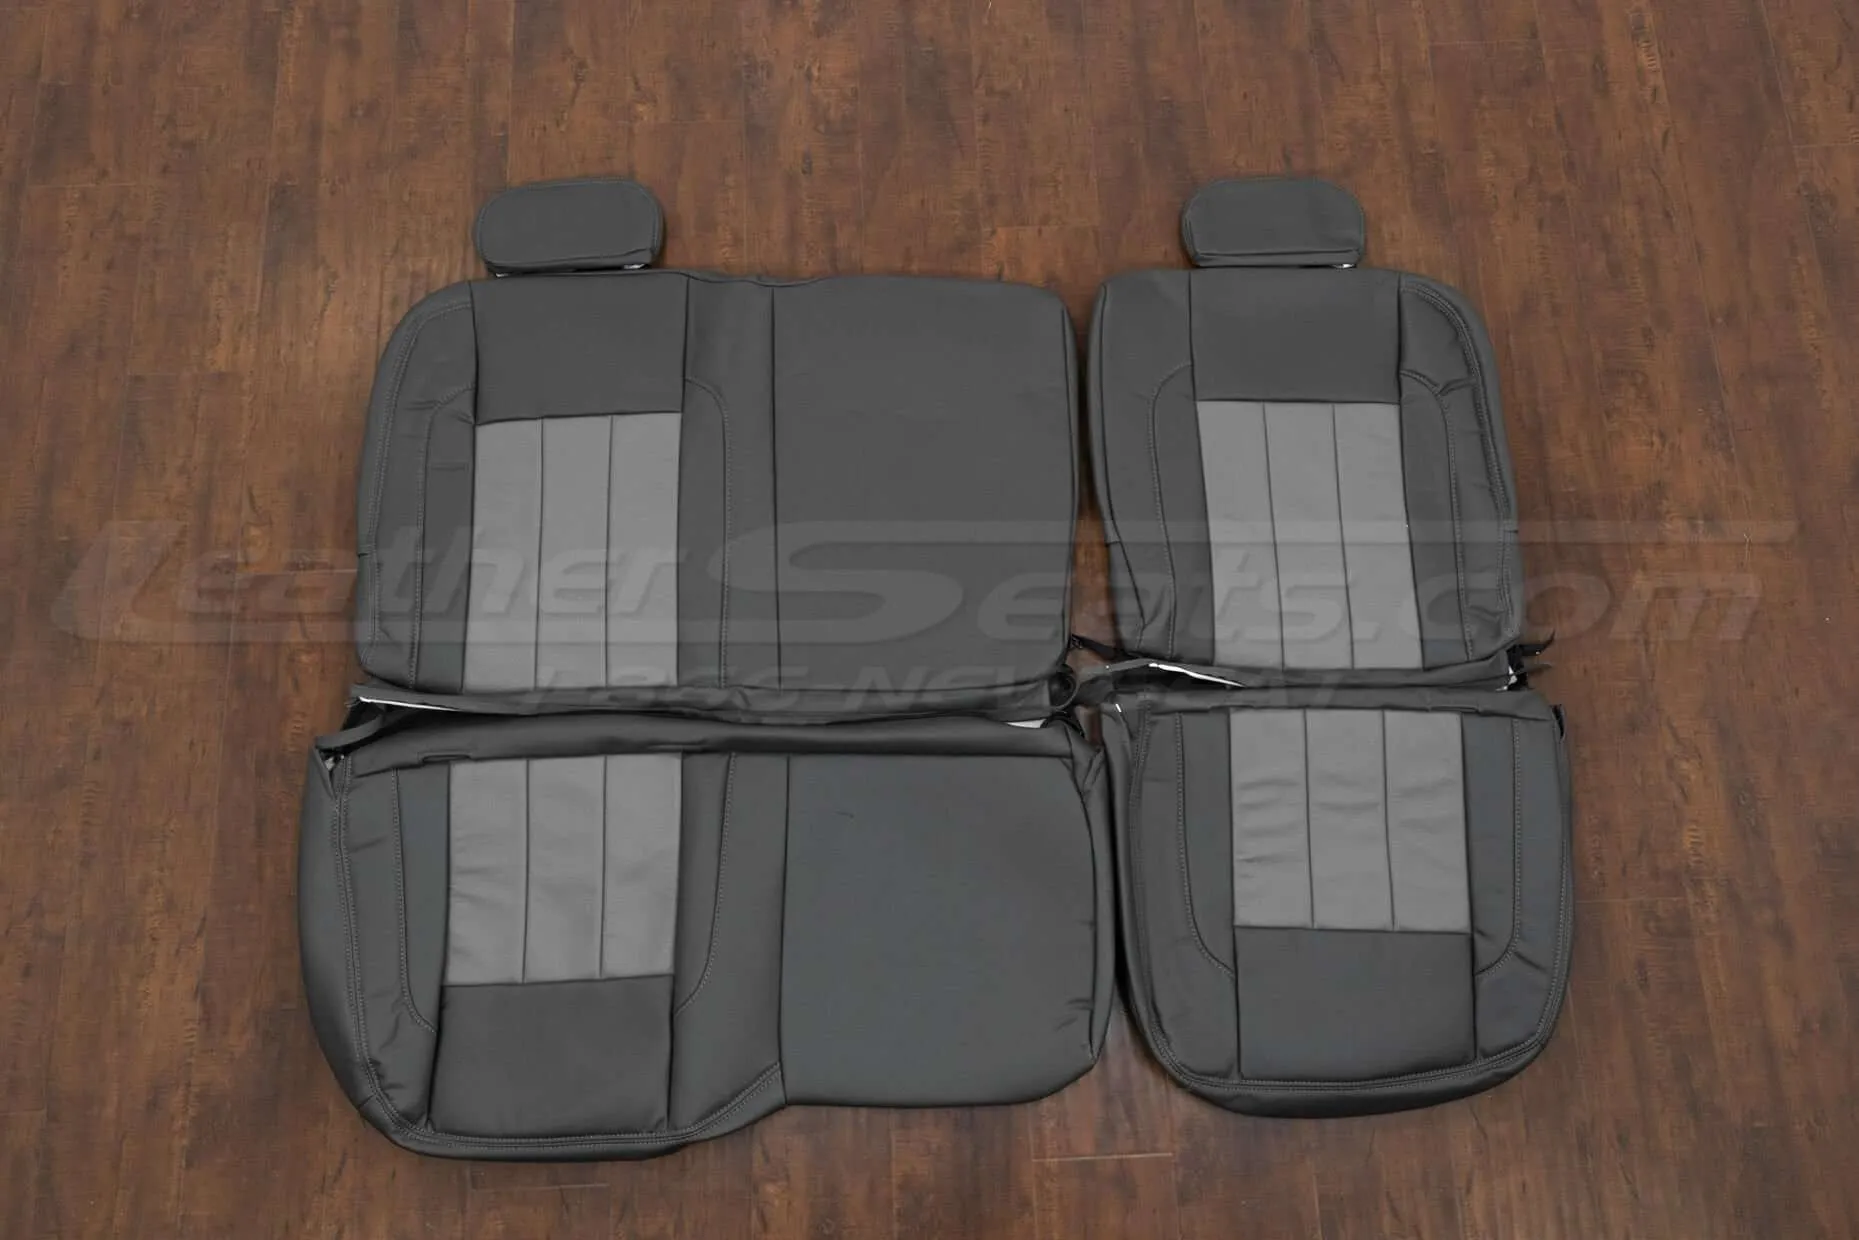 Dodge Ram Quad Cab Leather Seat Kit - Graphite & Ligt Grey Inserts - Rear seat upholstery